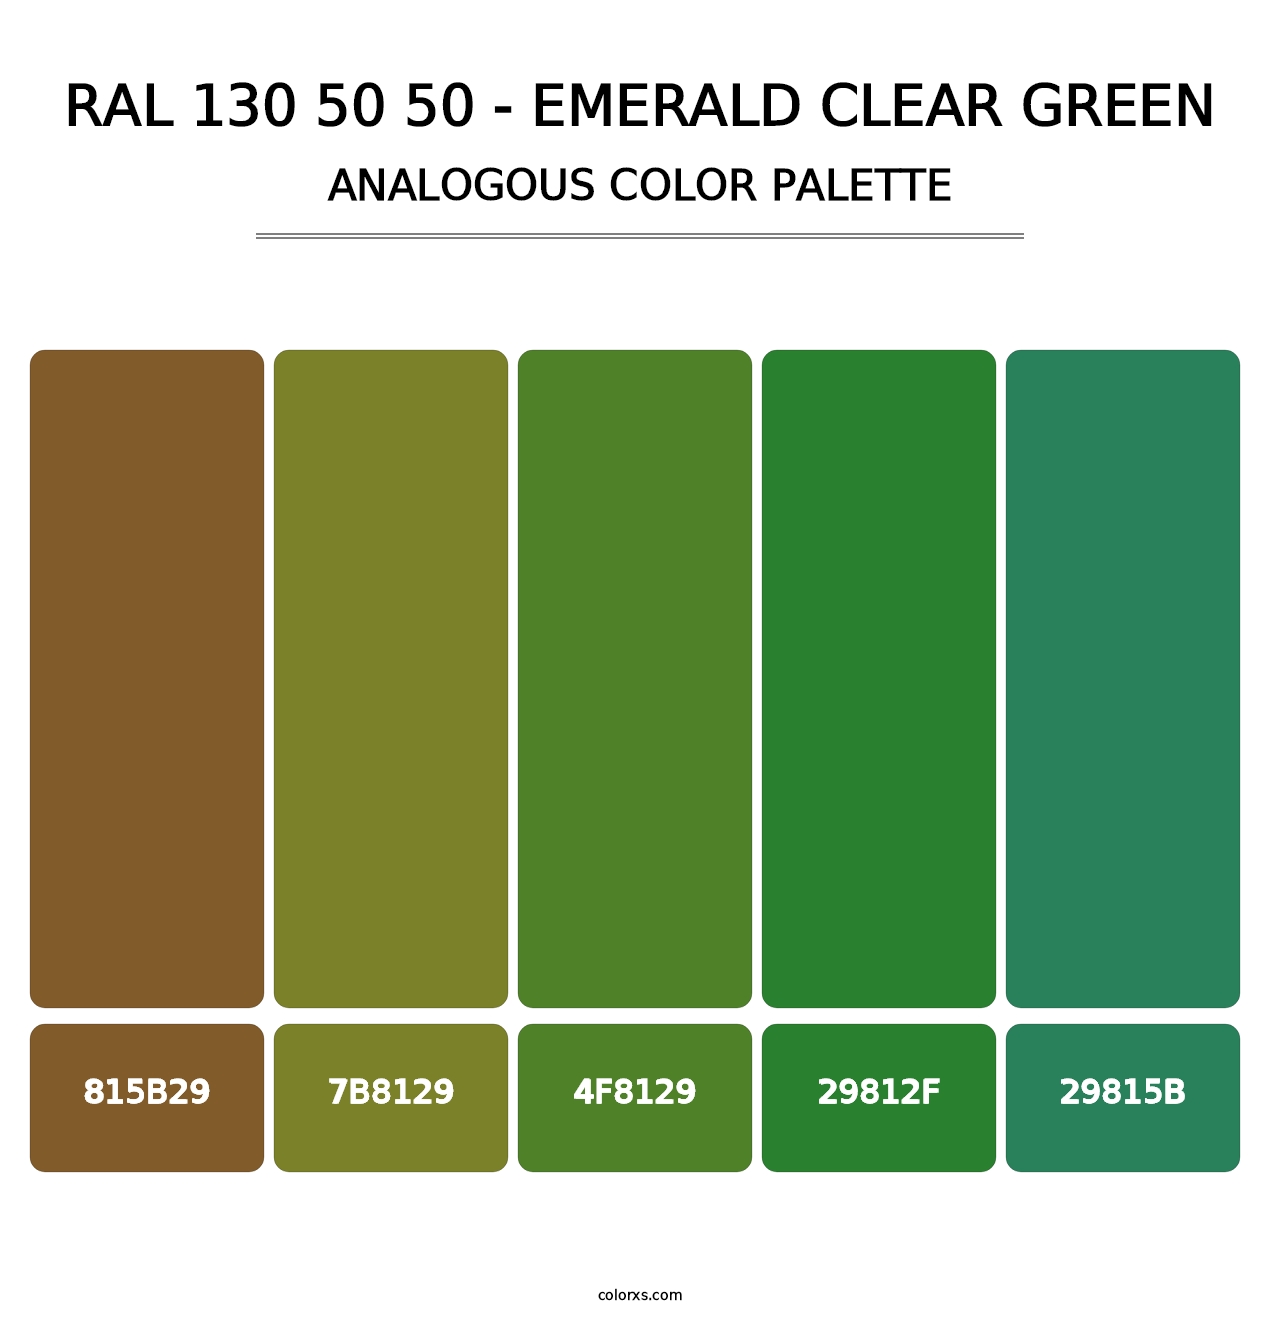 RAL 130 50 50 - Emerald Clear Green - Analogous Color Palette